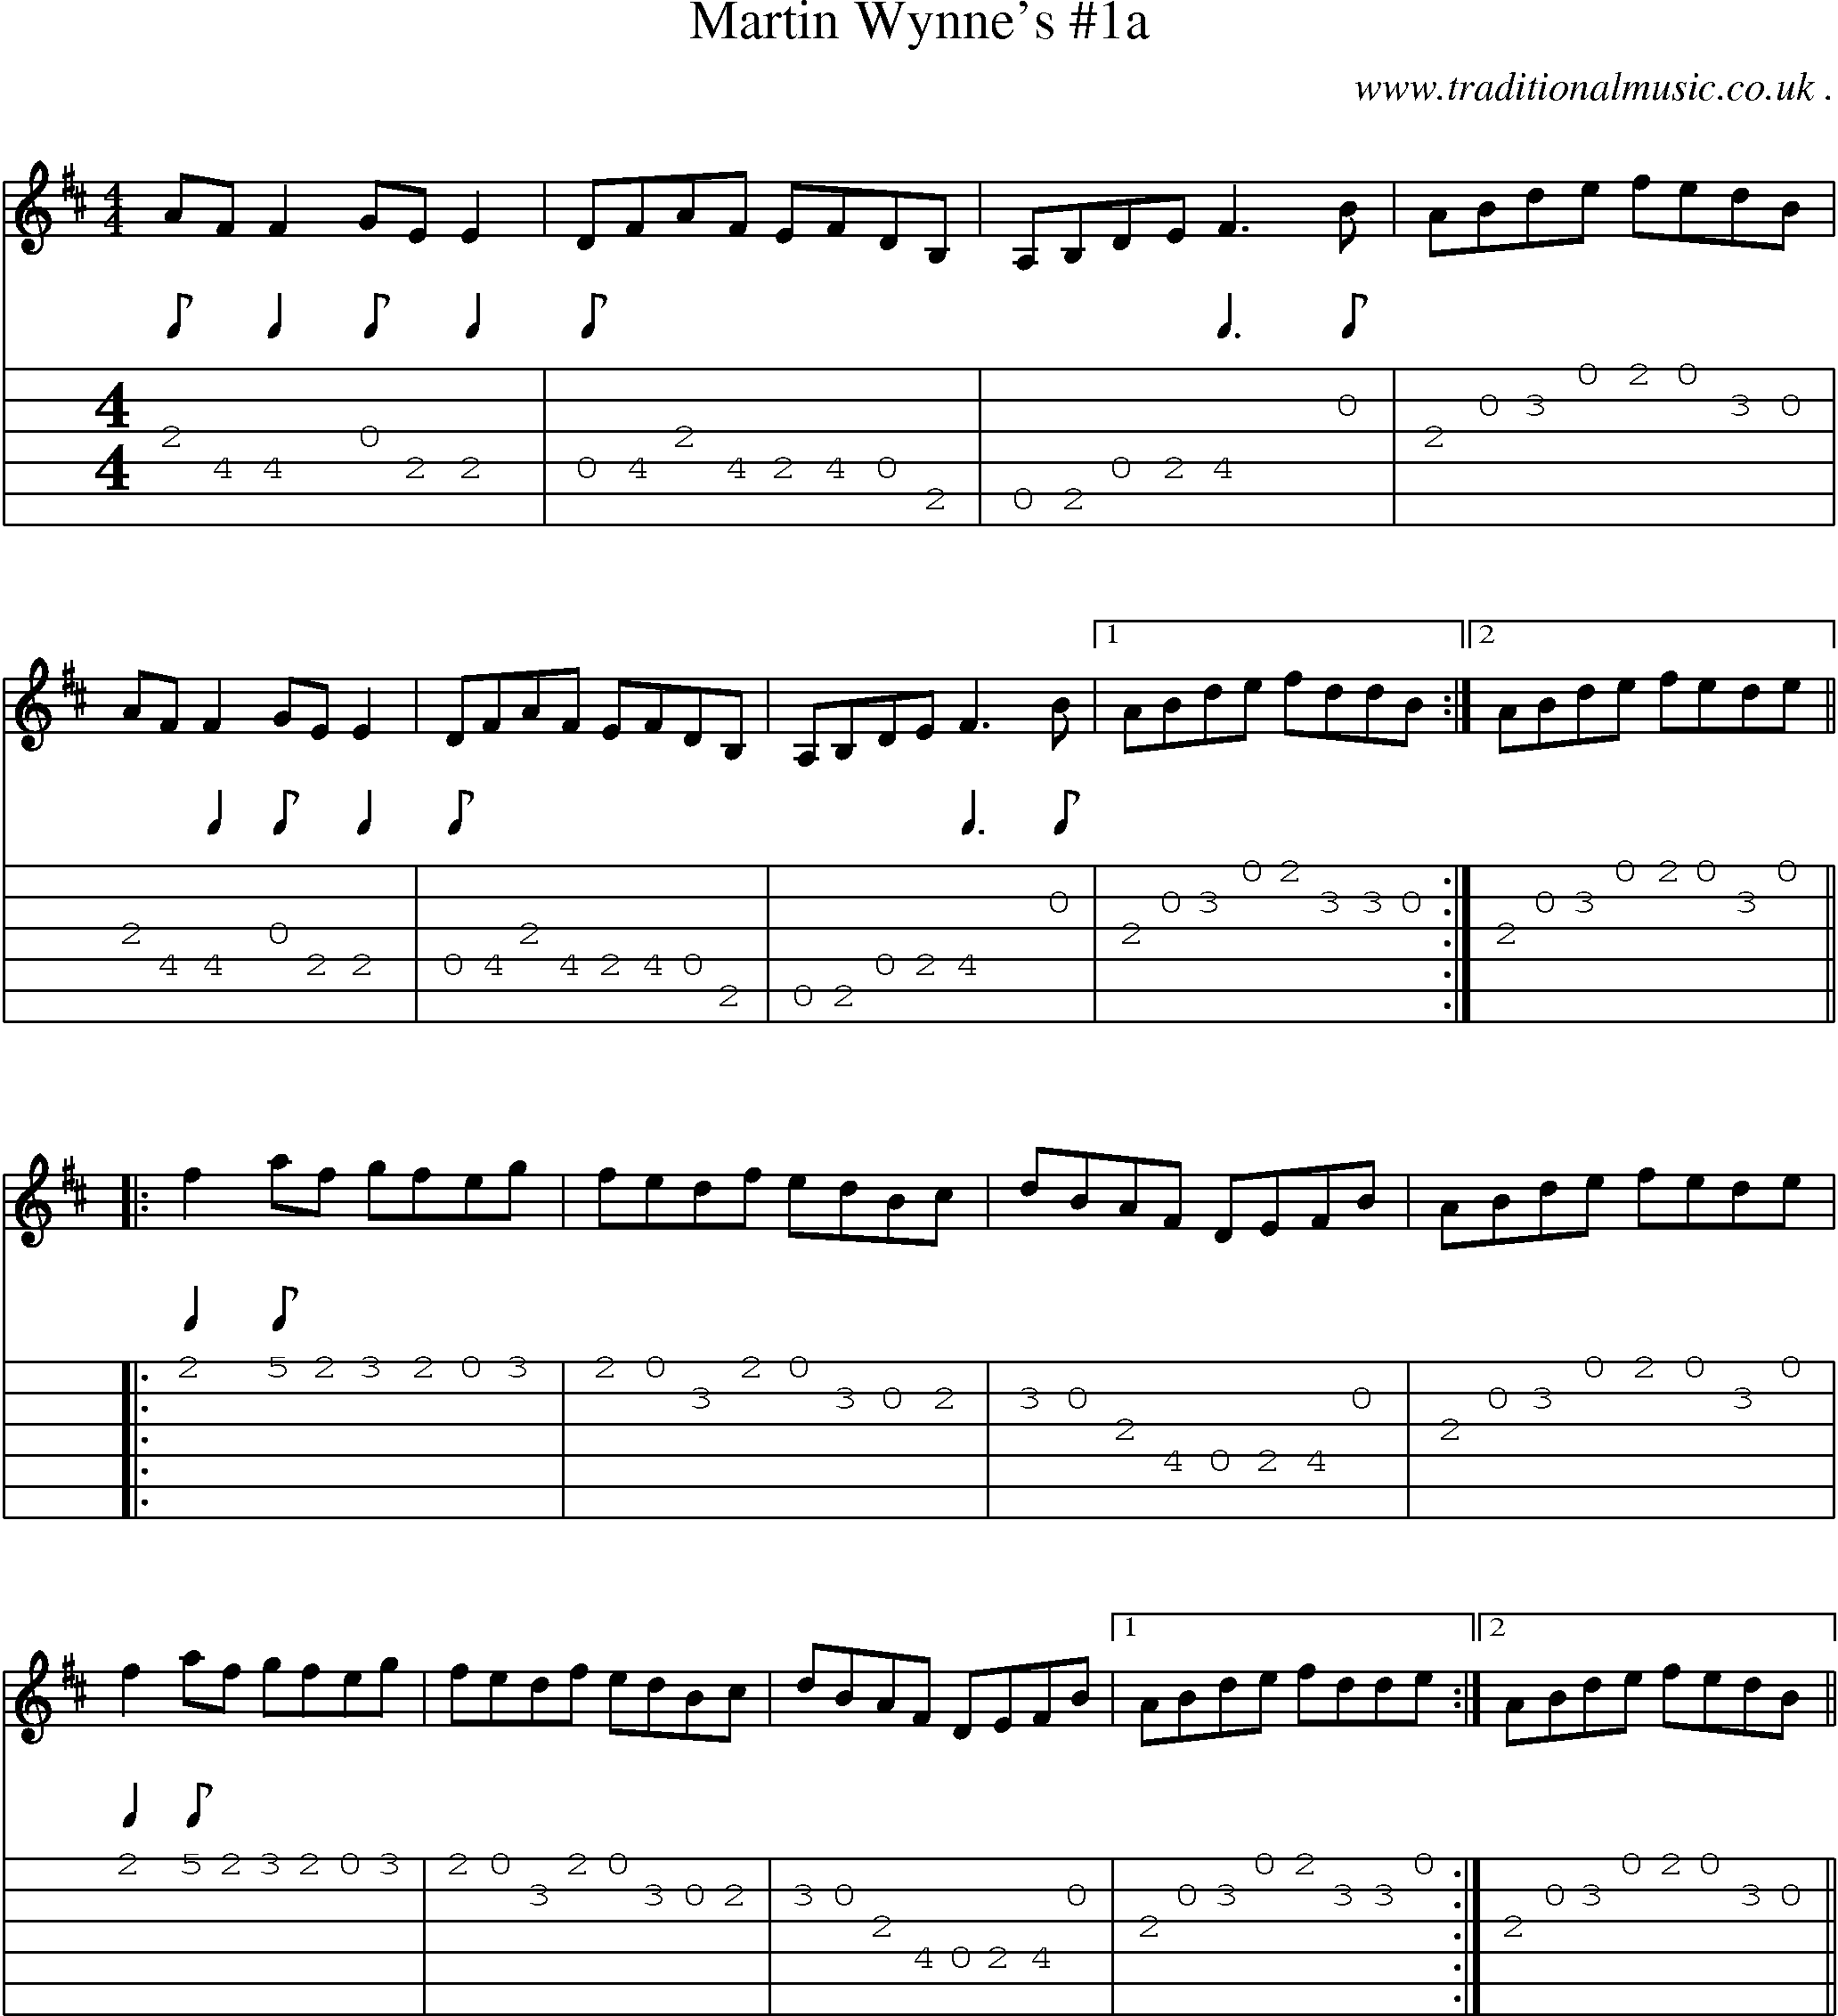 Sheet-Music and Guitar Tabs for Martin Wynnes 1a